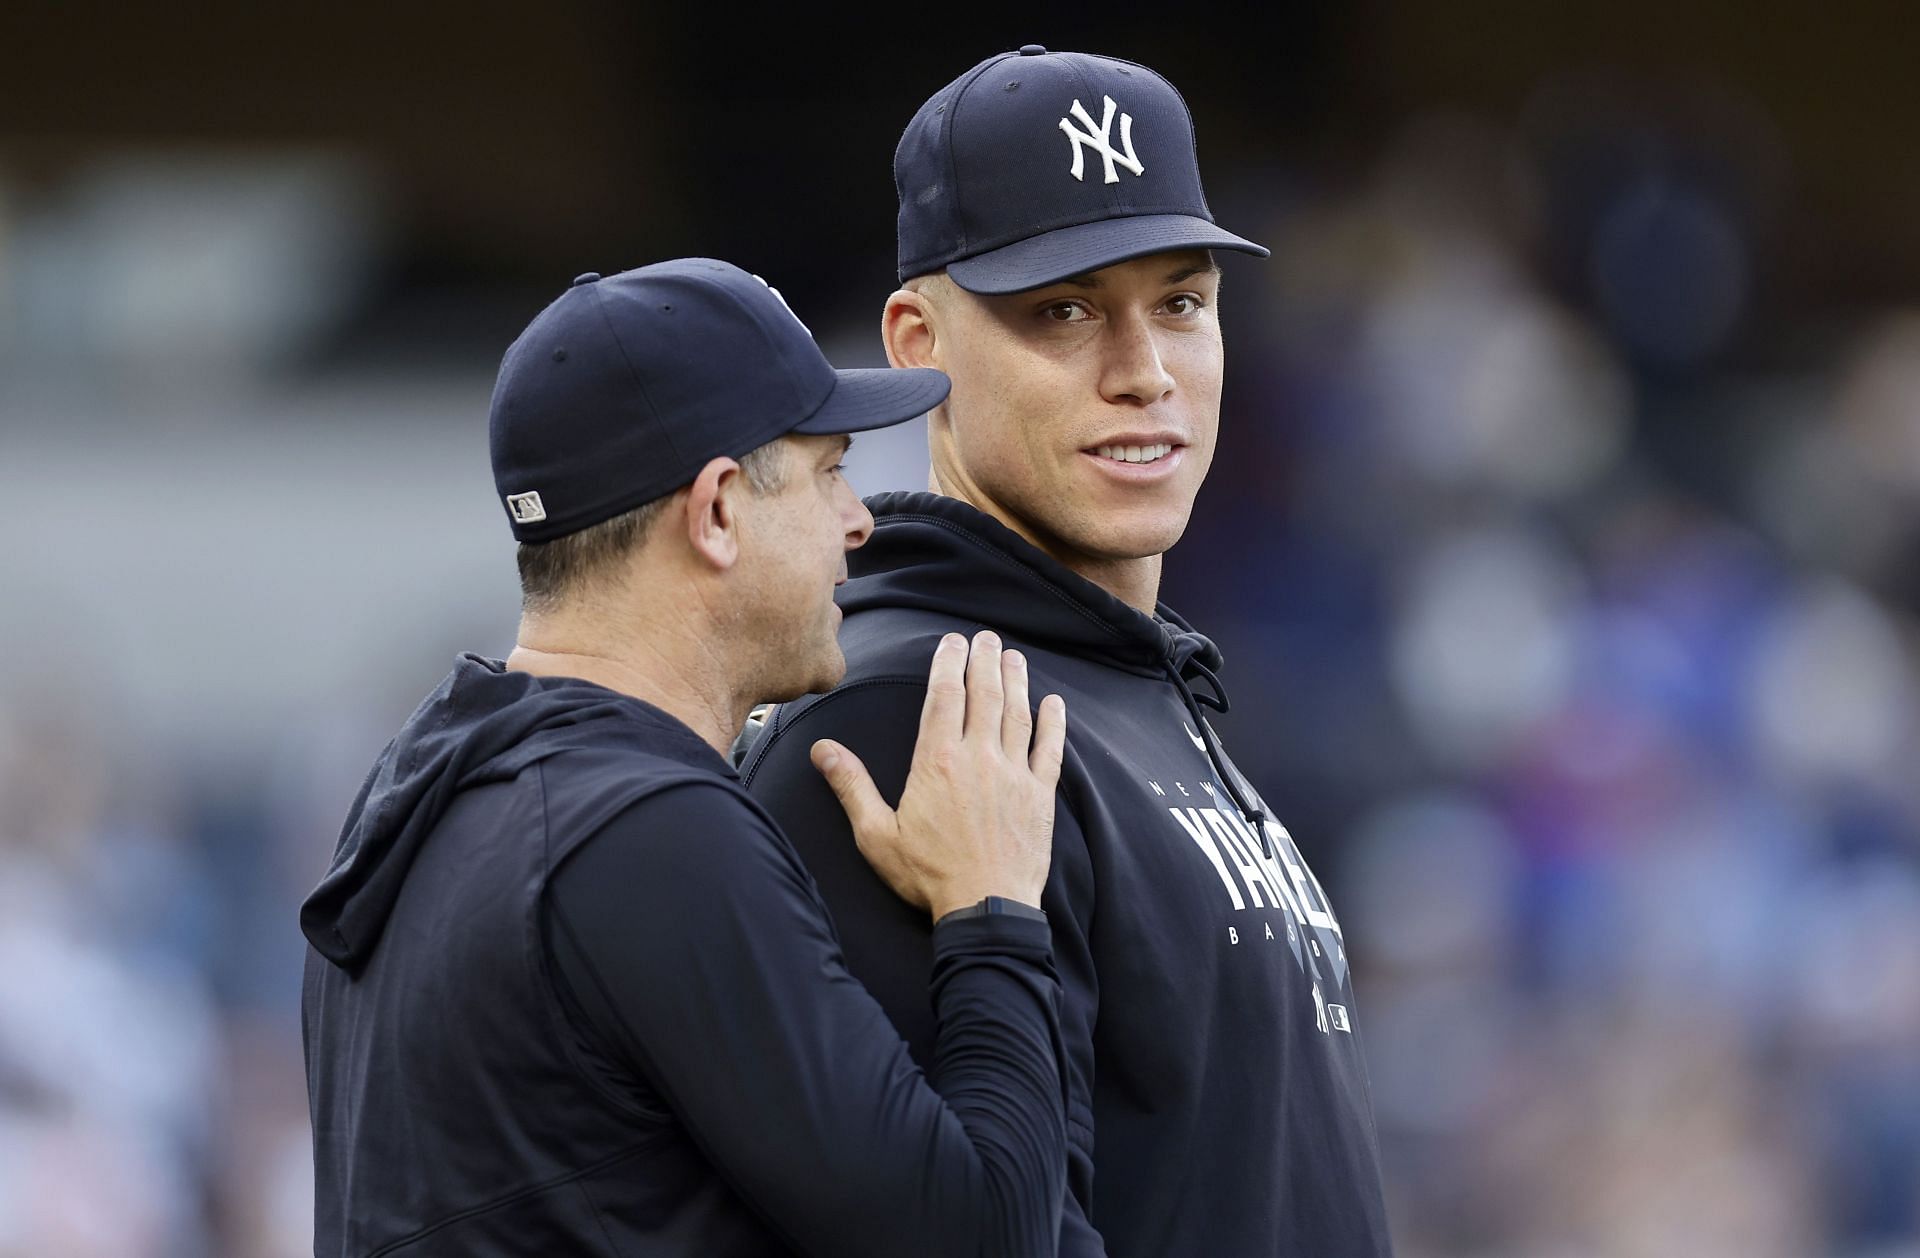 Aaron Judge (R) and manager Aaron Boone of the New York Yankees celebrate after a win at Yankee Stadium